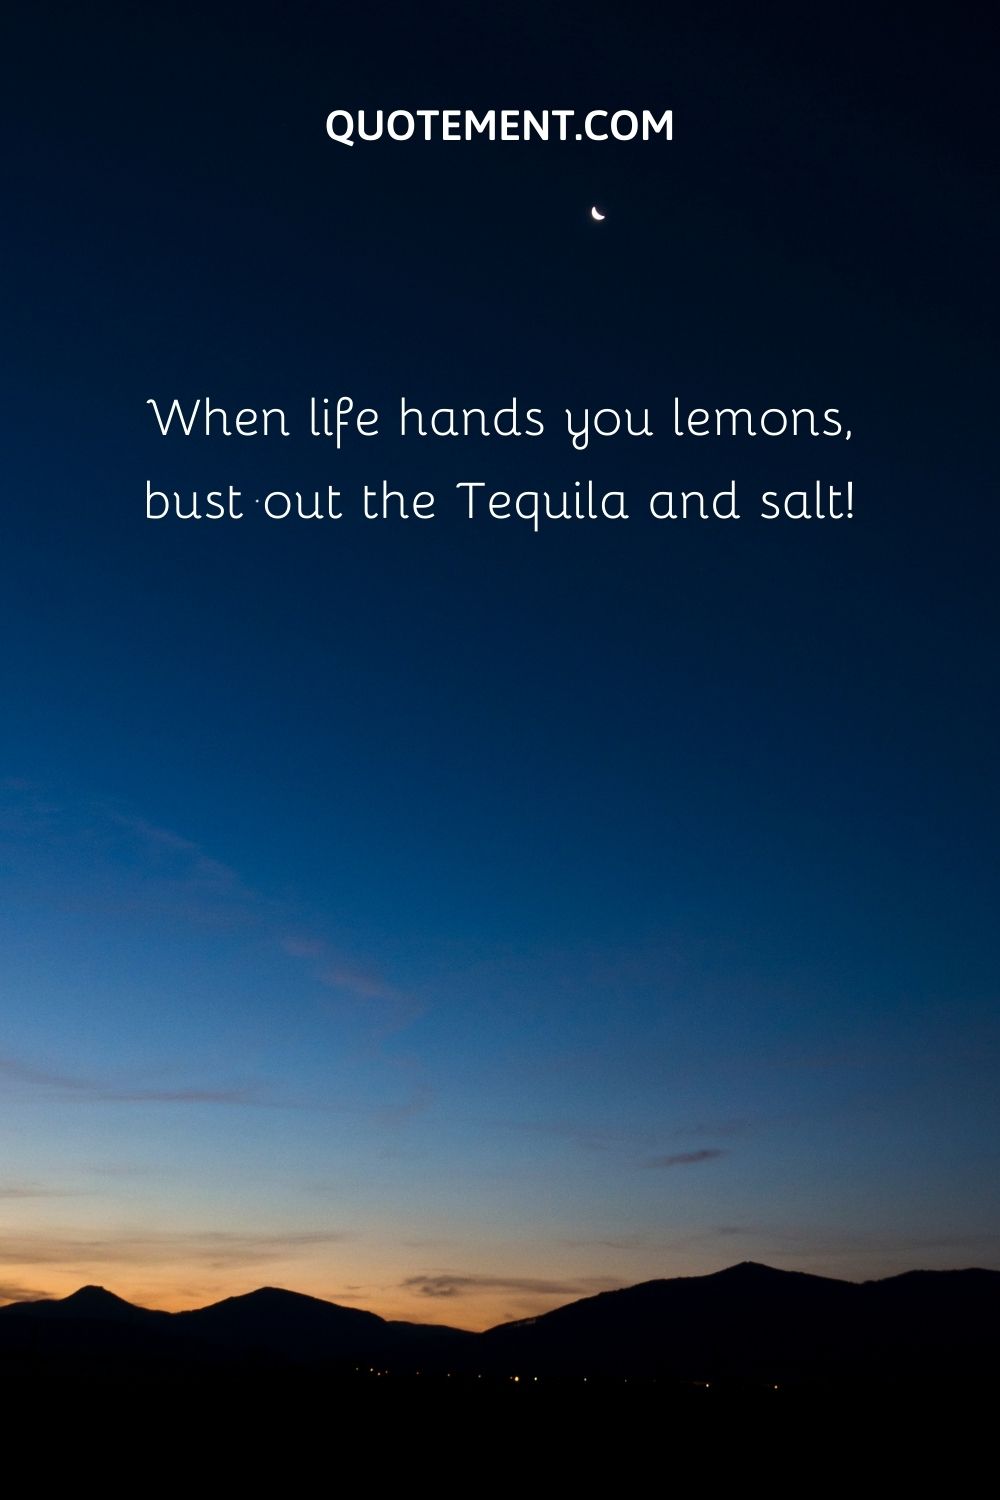 When life hands you lemons, bust out the Tequila and salt